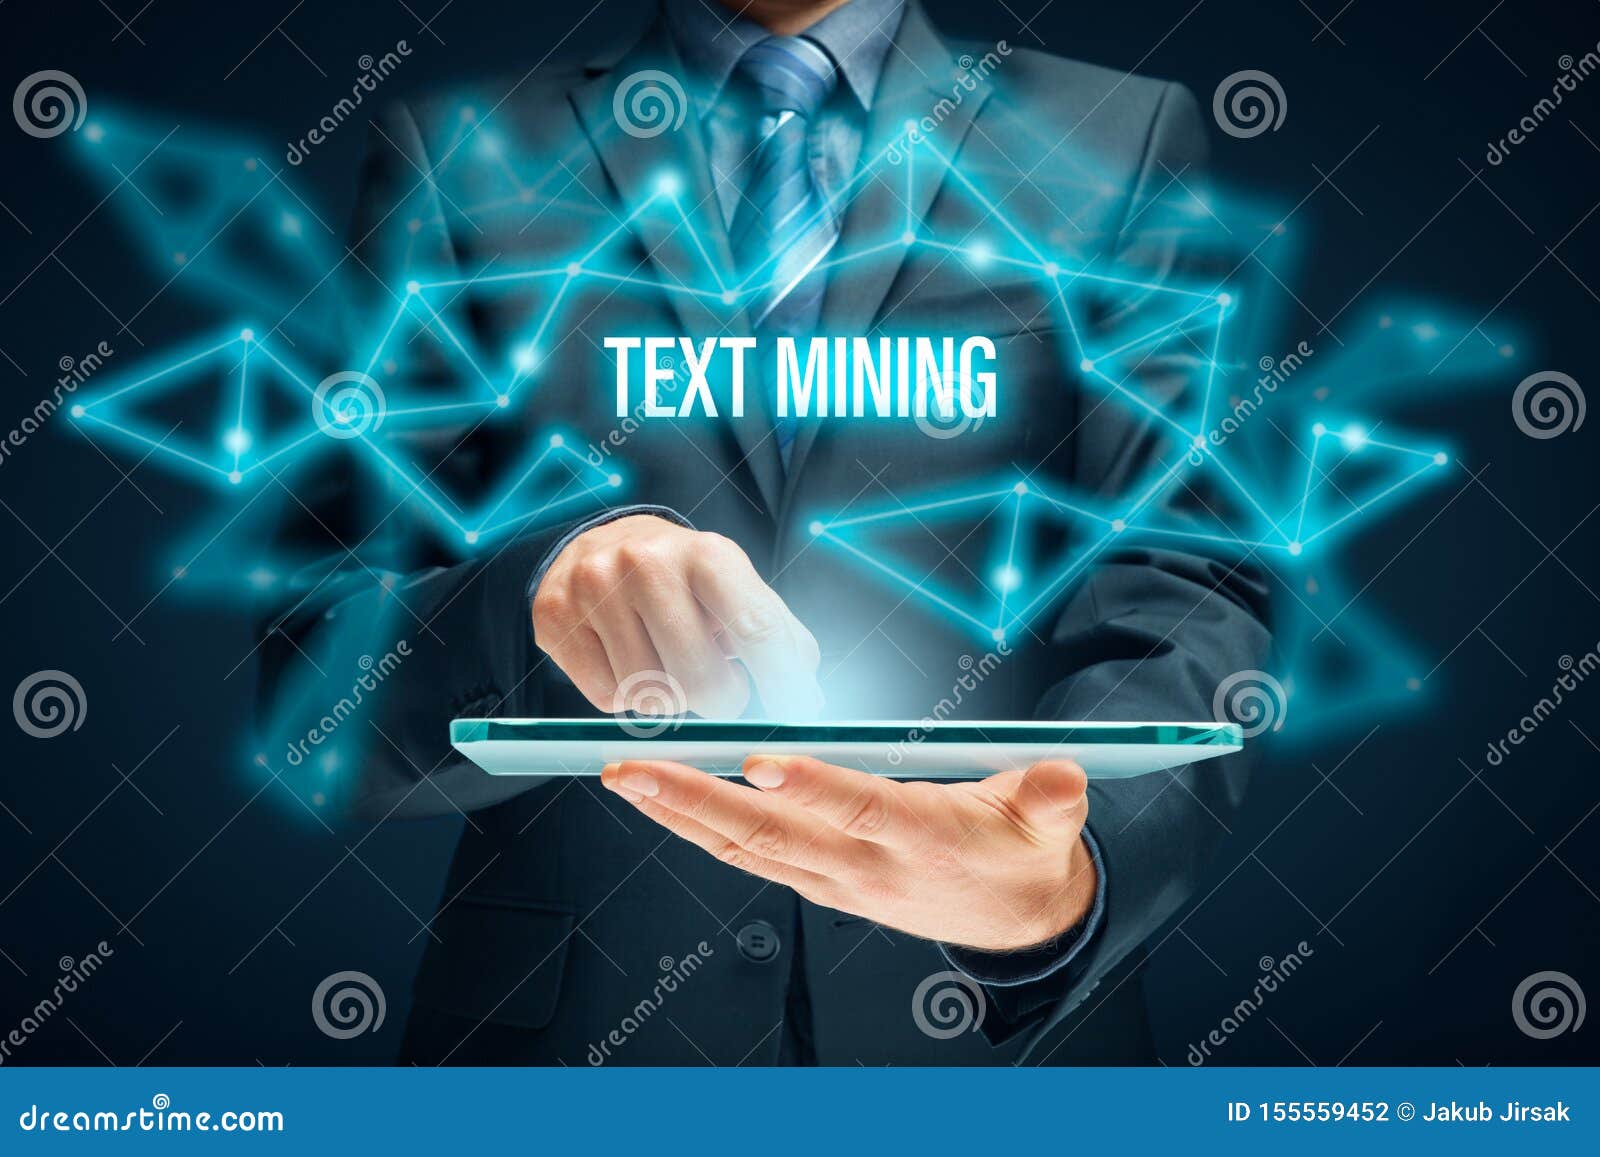 text mining and analysis concept